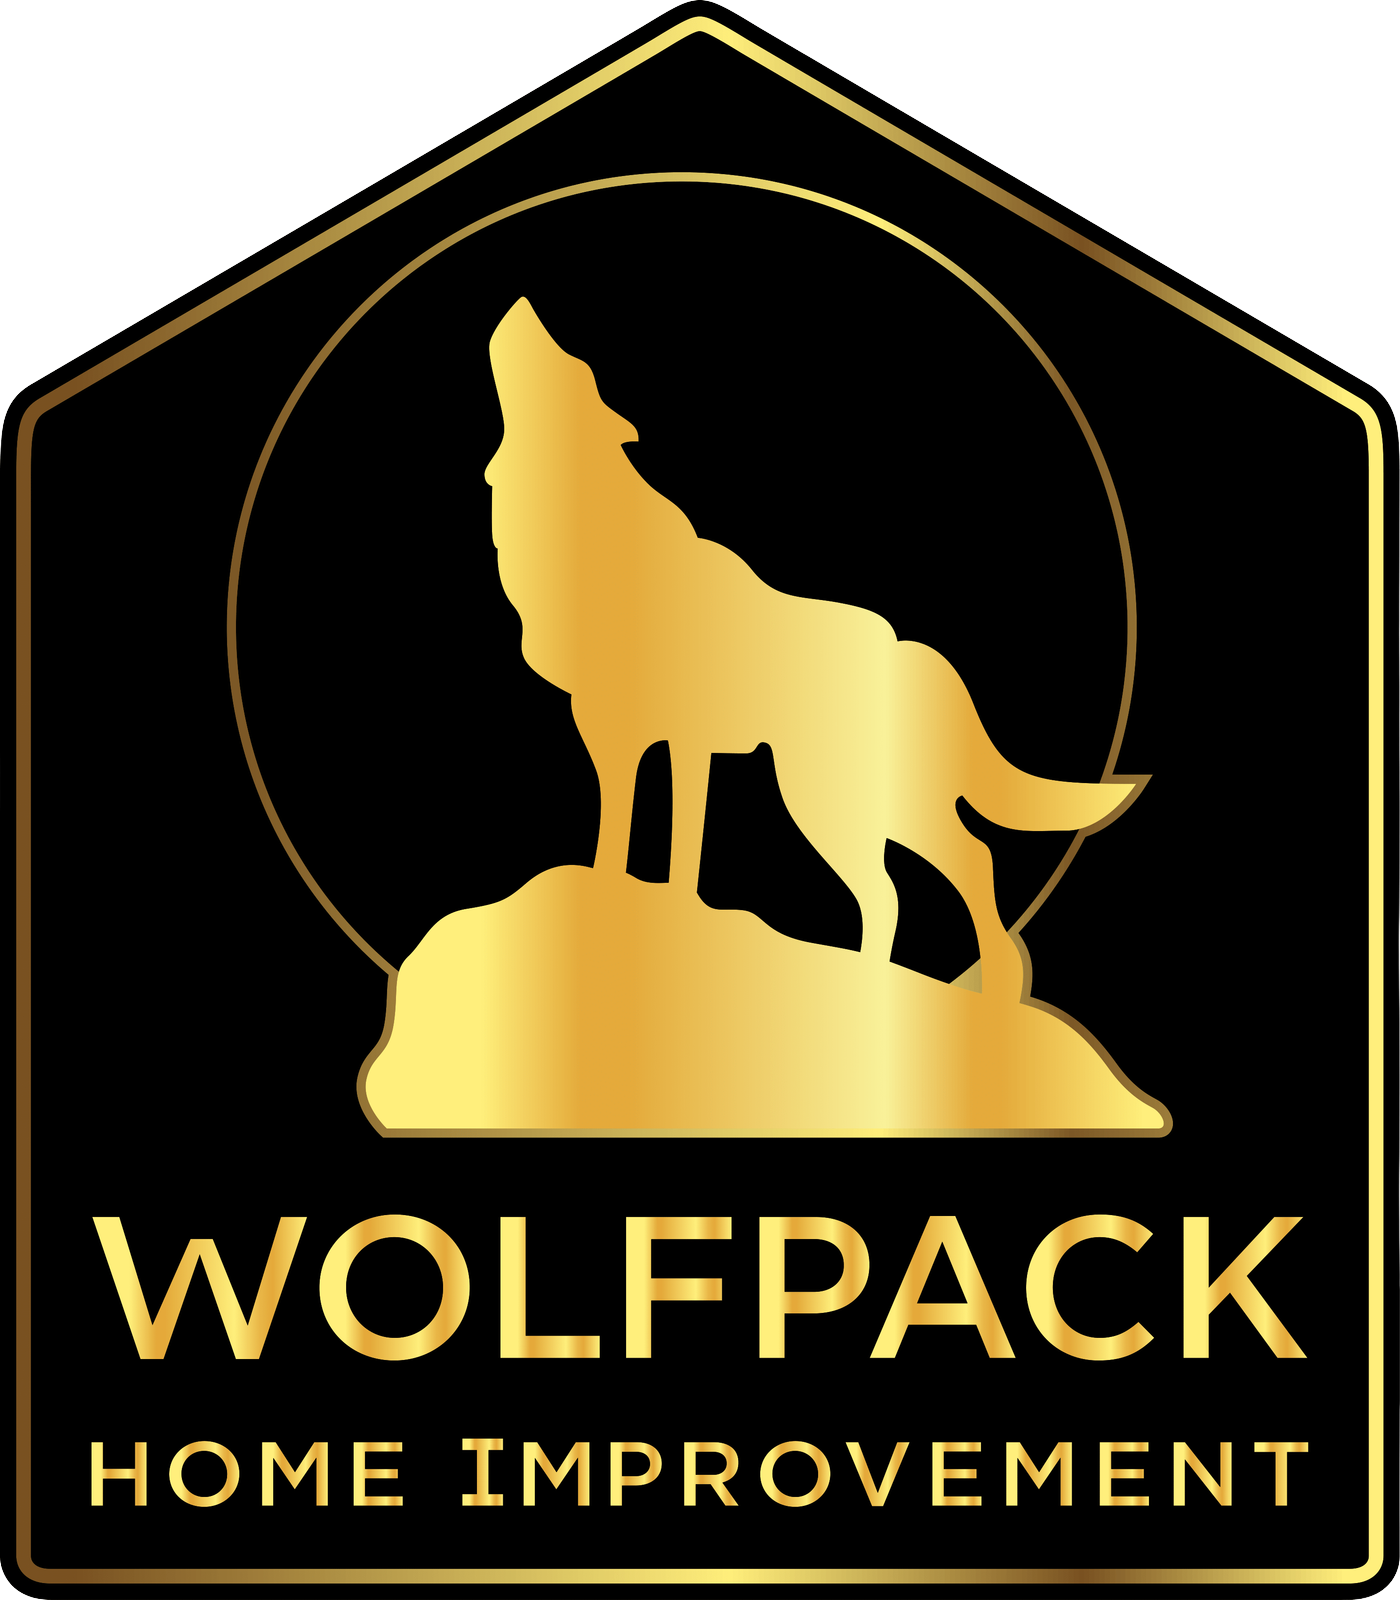 Wolfpack-Home-Improvement-logo.png